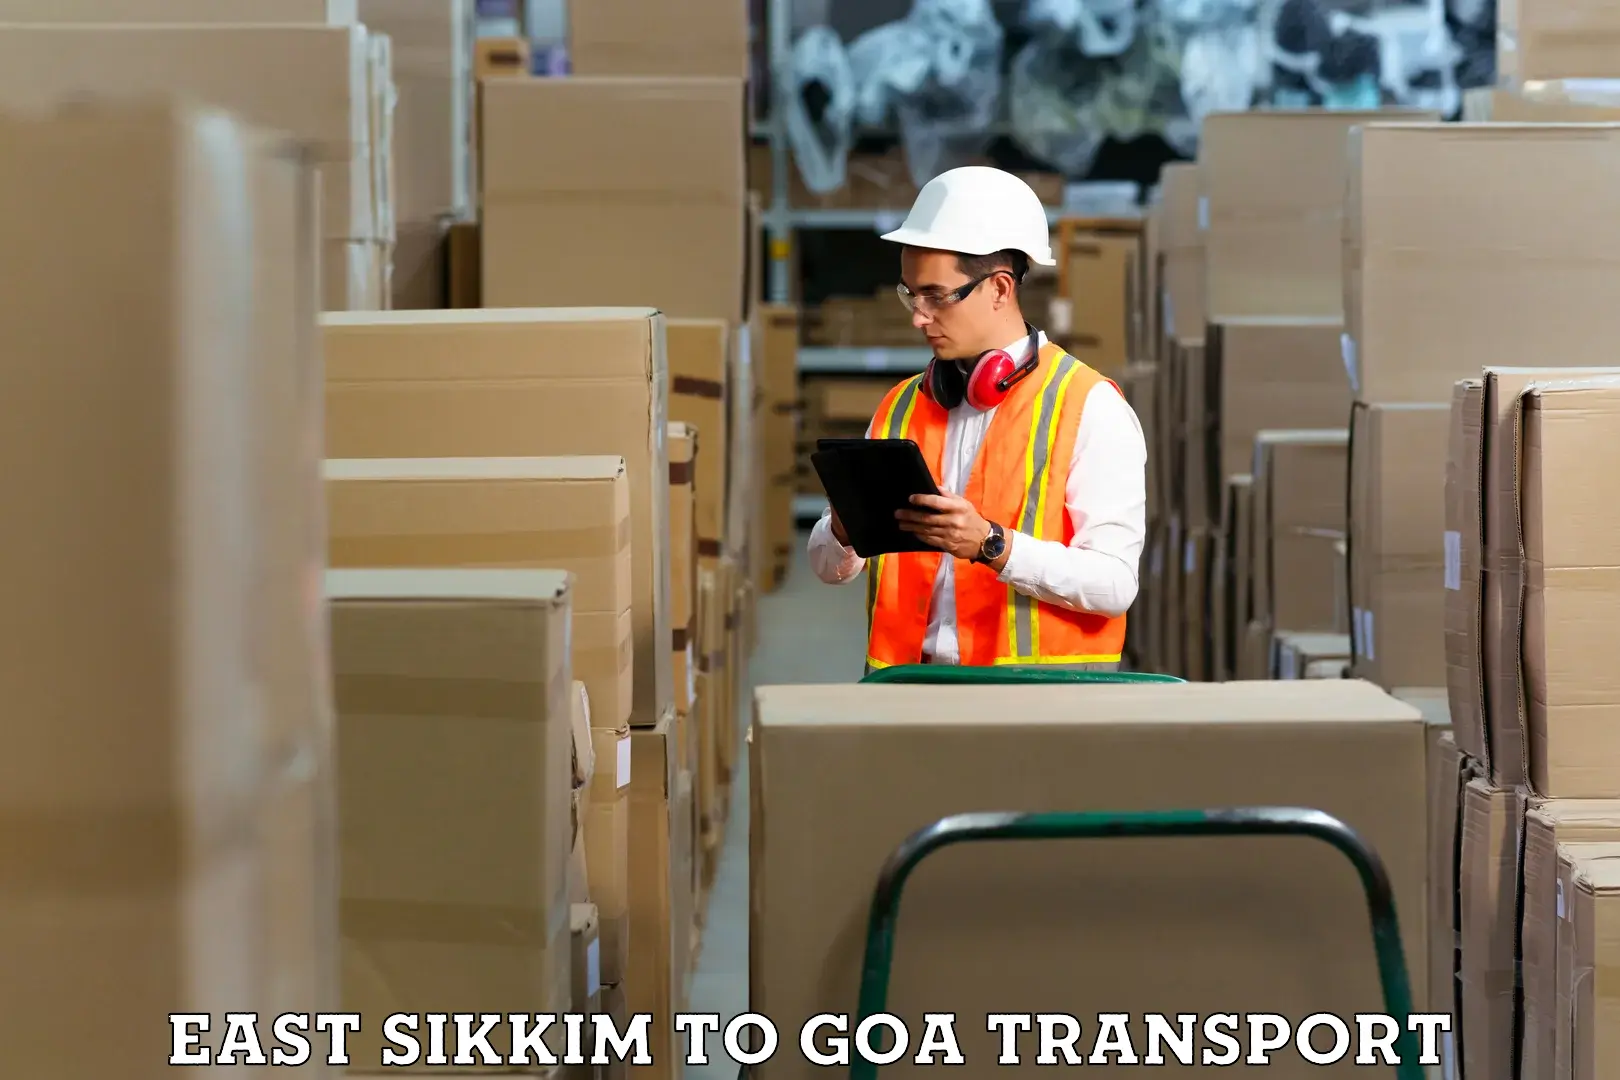 Daily transport service East Sikkim to Panaji